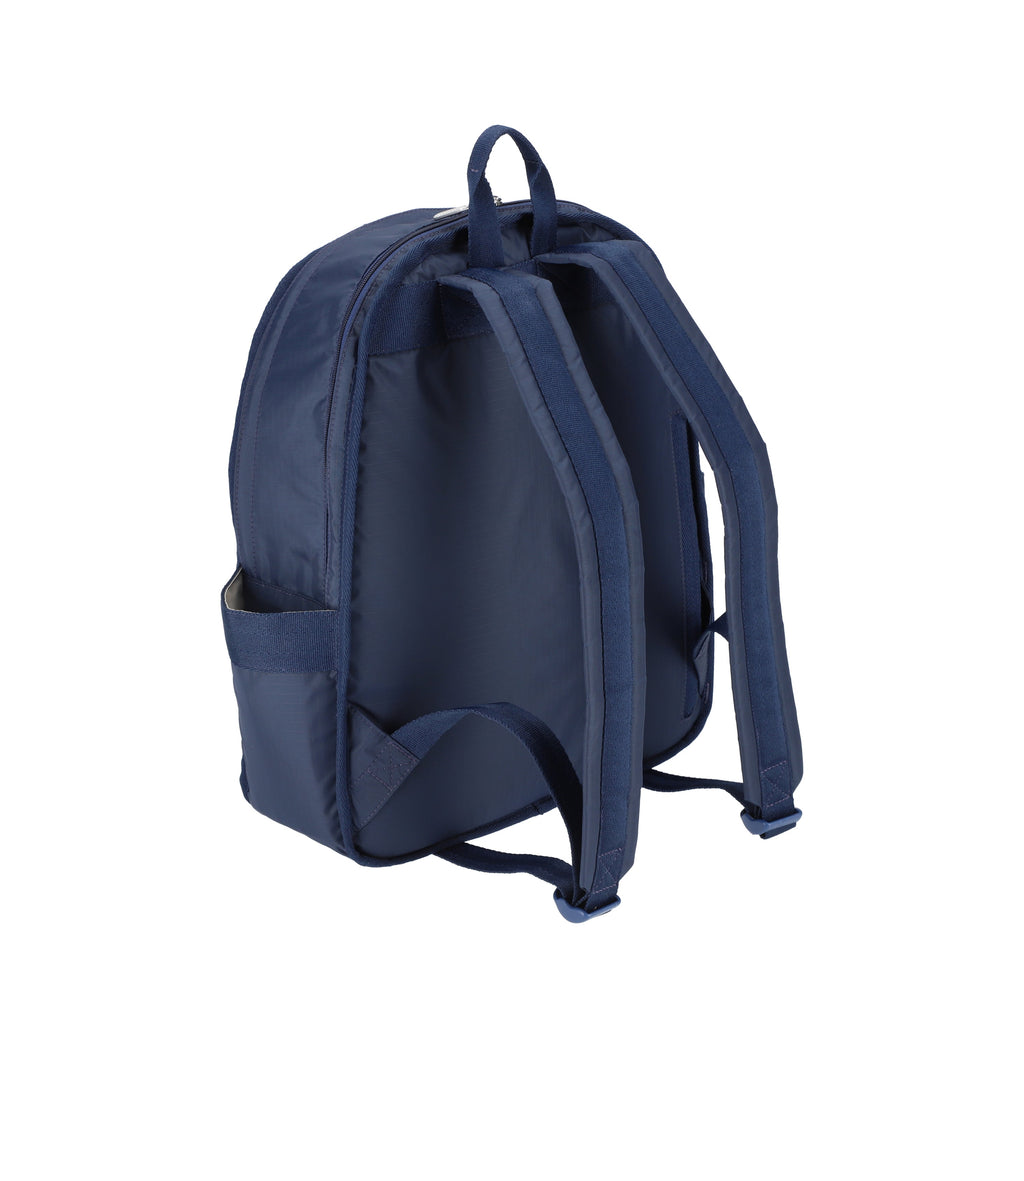 Route Backpack - 23818453680176